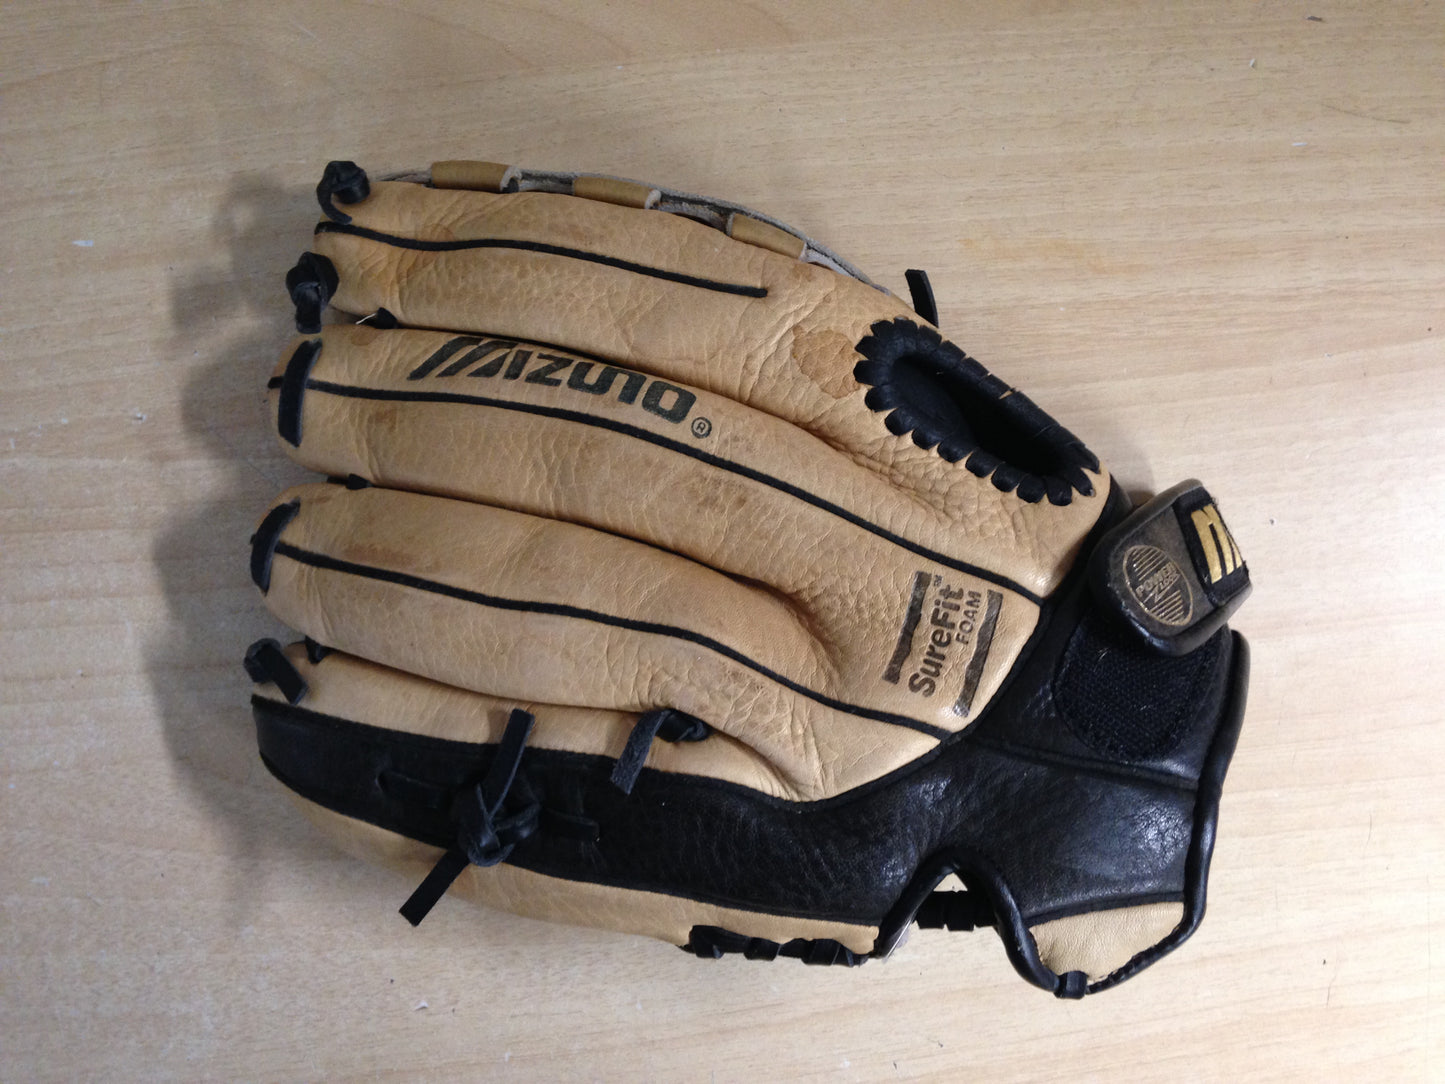 Baseball Glove Adult Size 11.5 inch Mizuno Leather Brown Black Fits on Left Hand